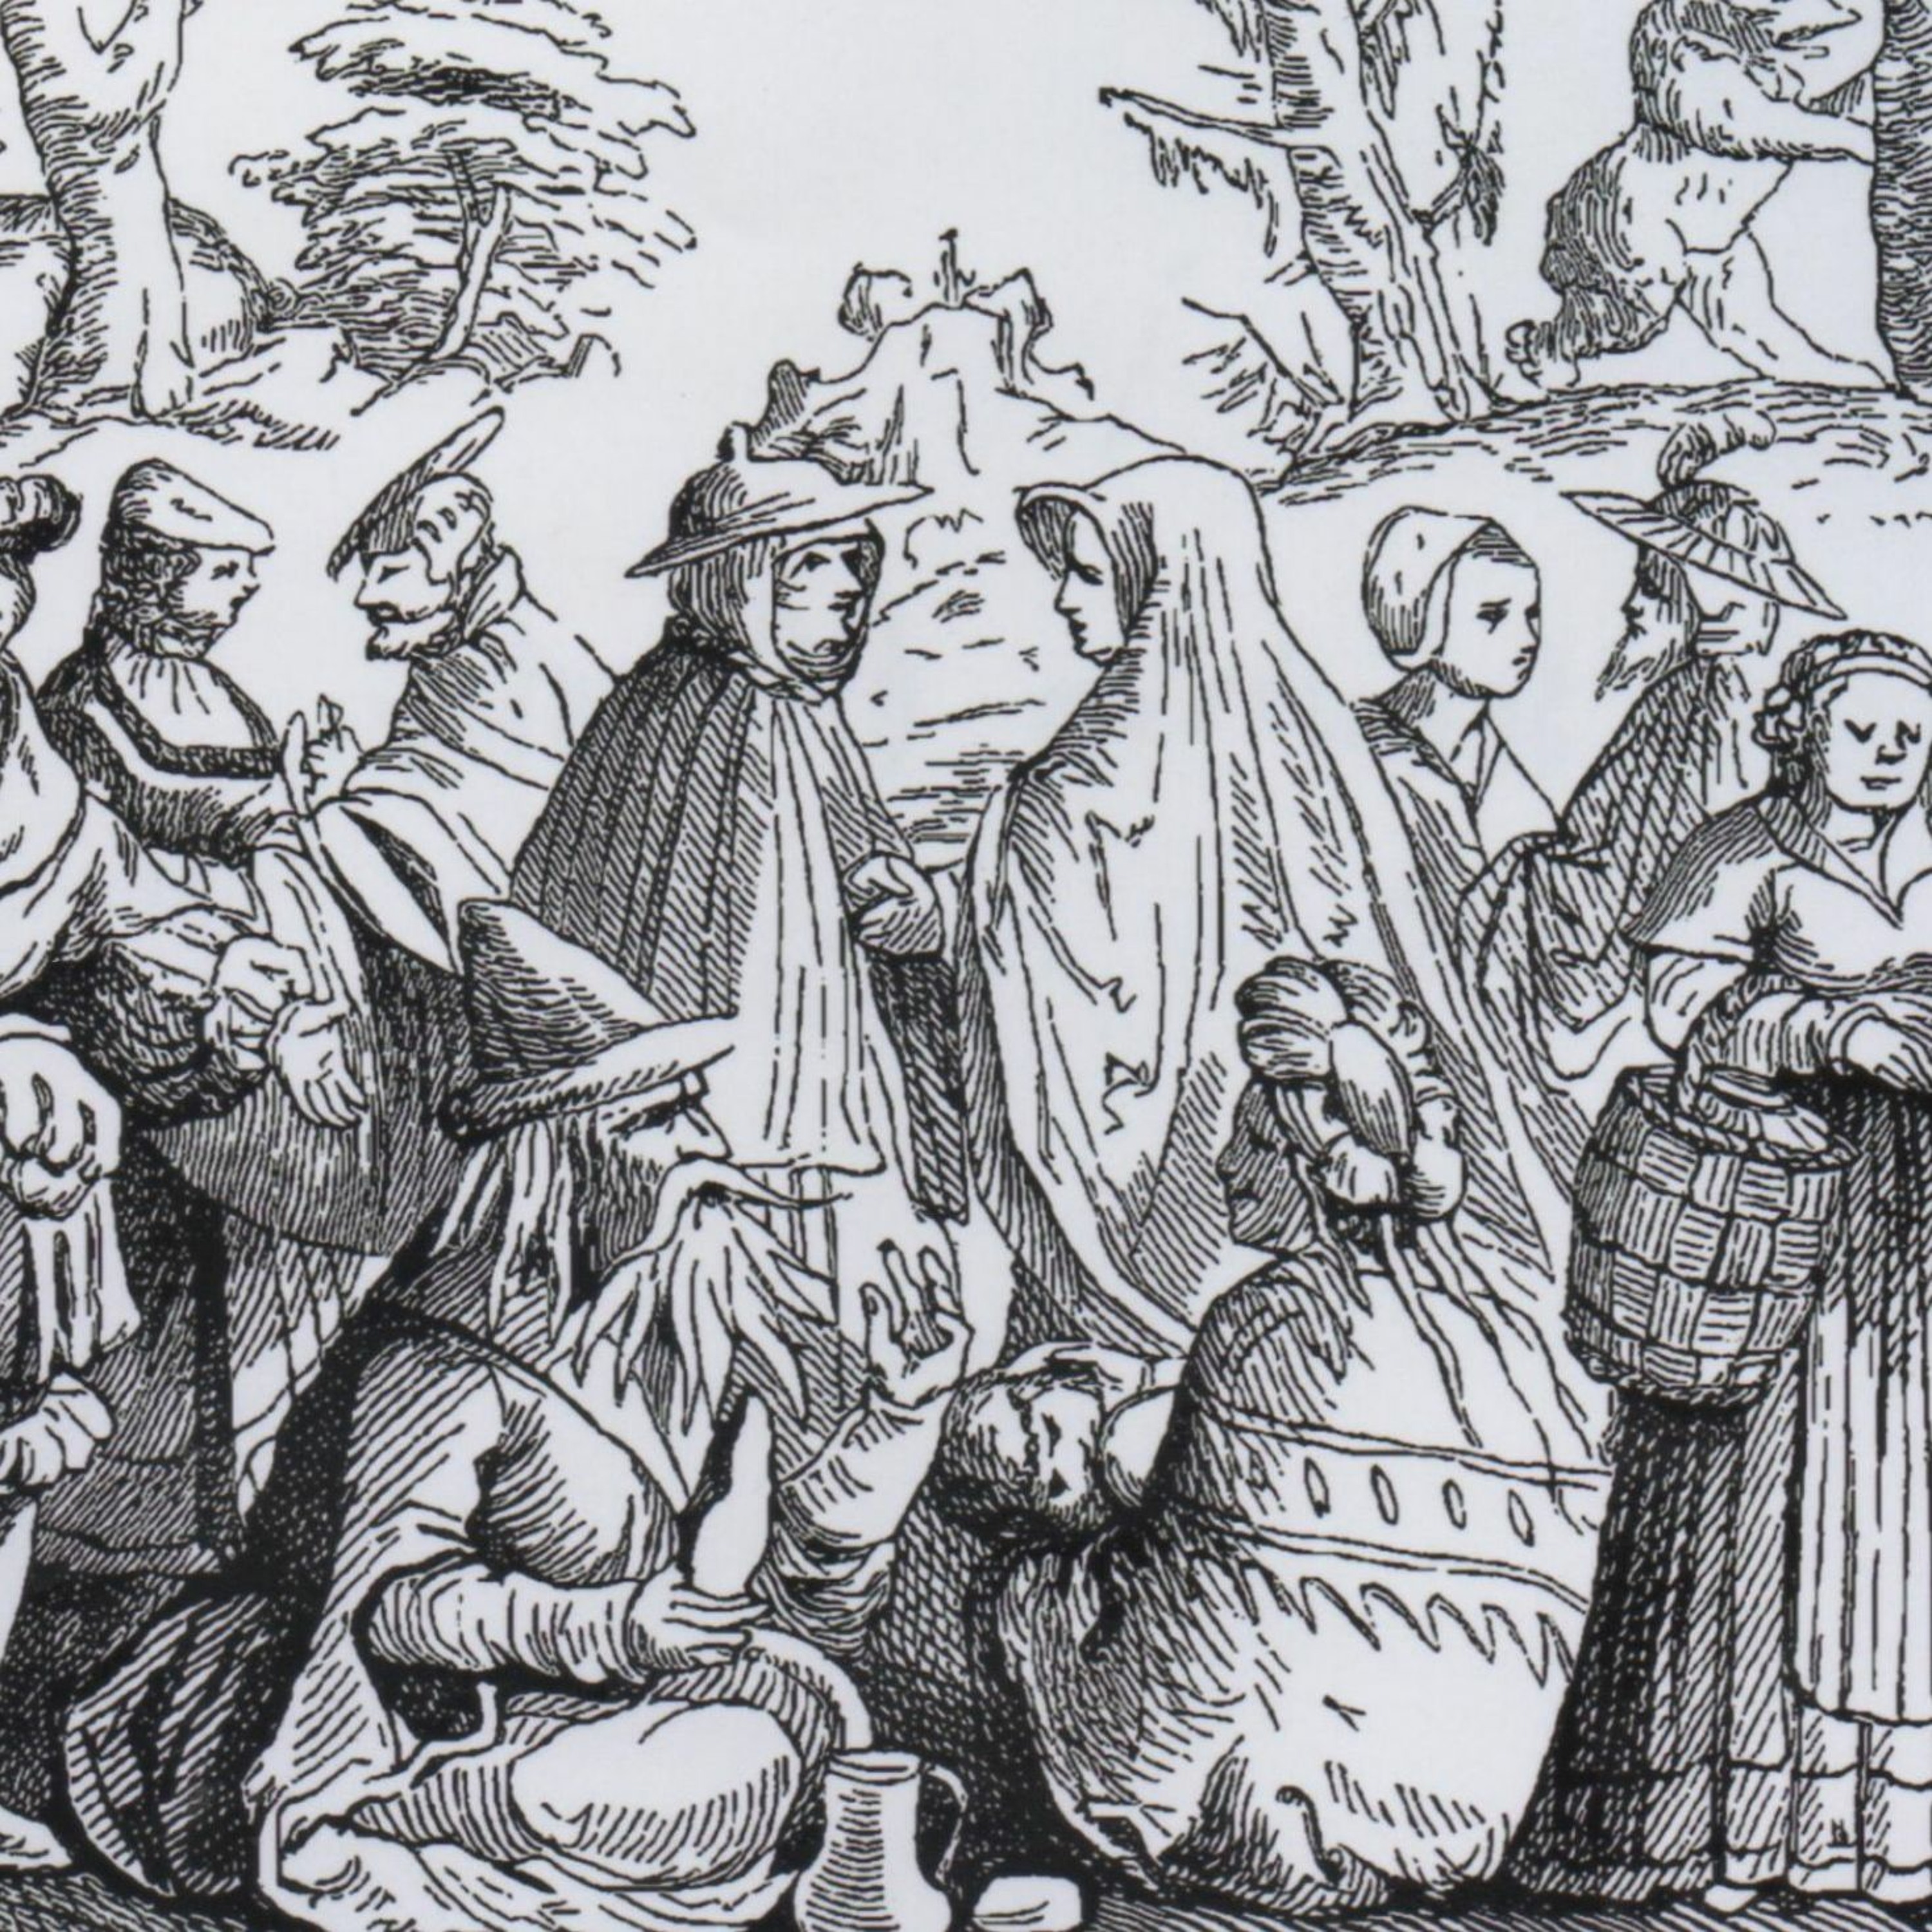 History of the Roma (”Gypsies”), part 1 -- From Ancient Origins to the Eighteenth Century